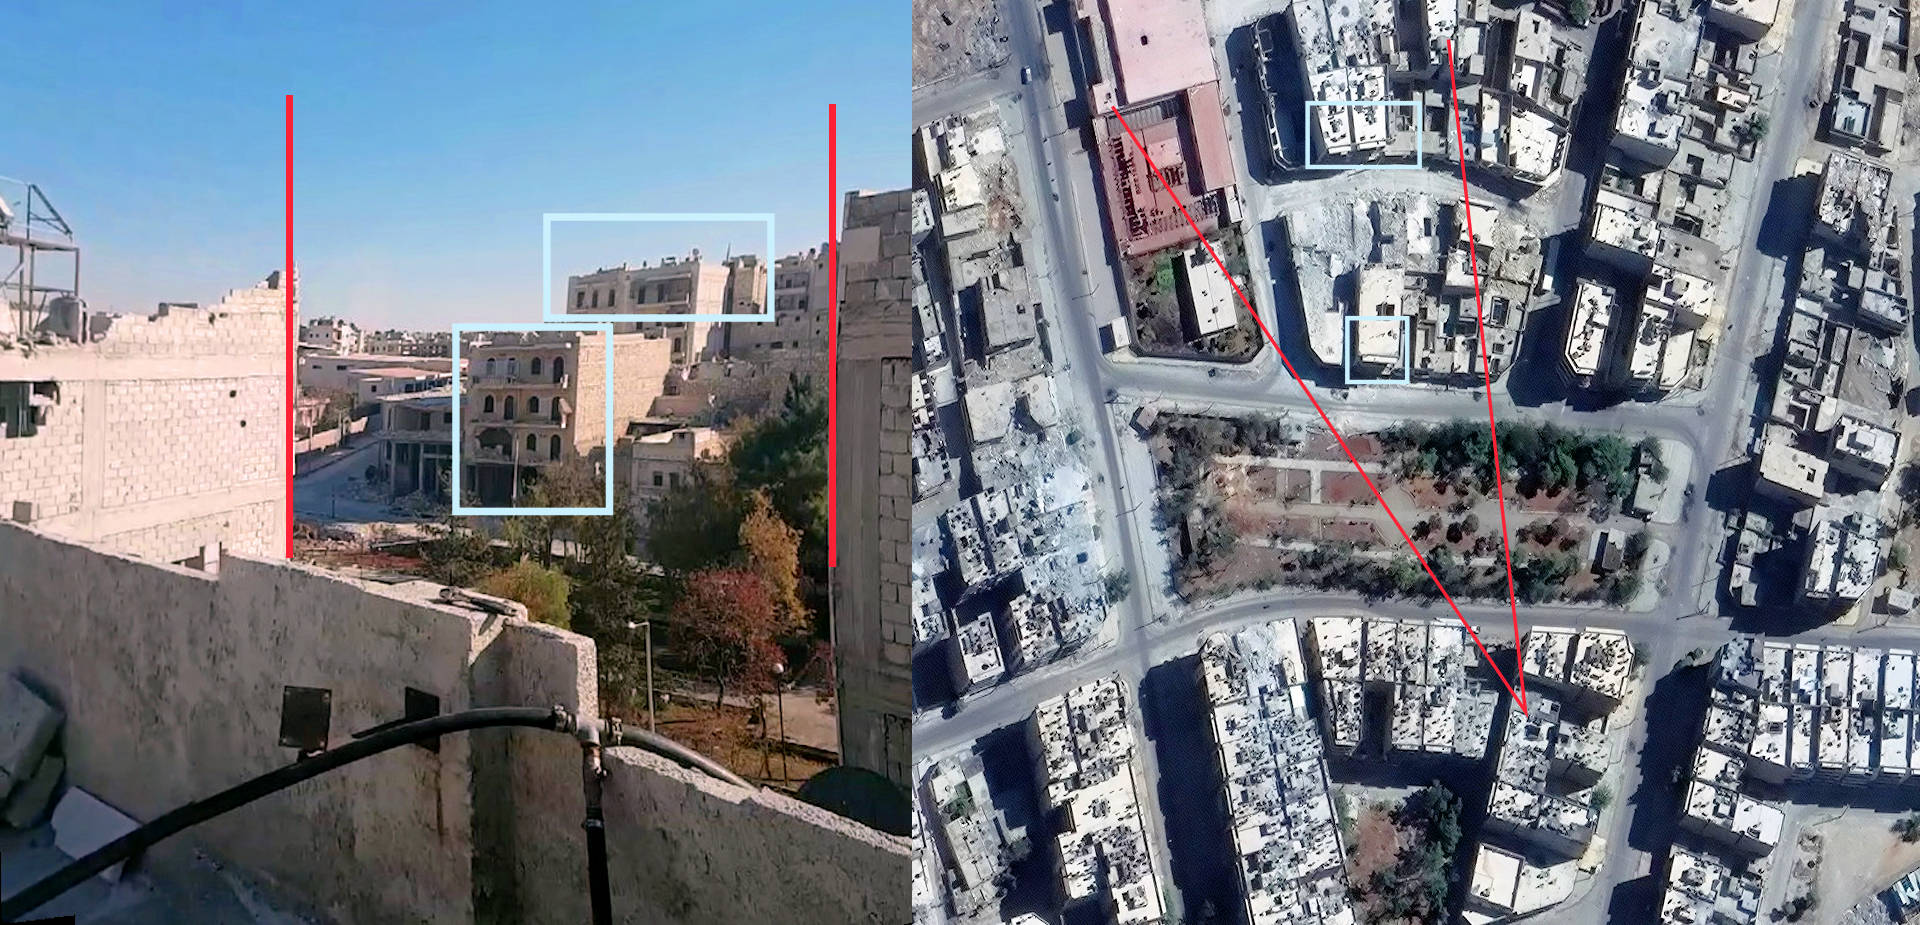 Image 4: Geolocation of Bana's house using a still from a Periscope video